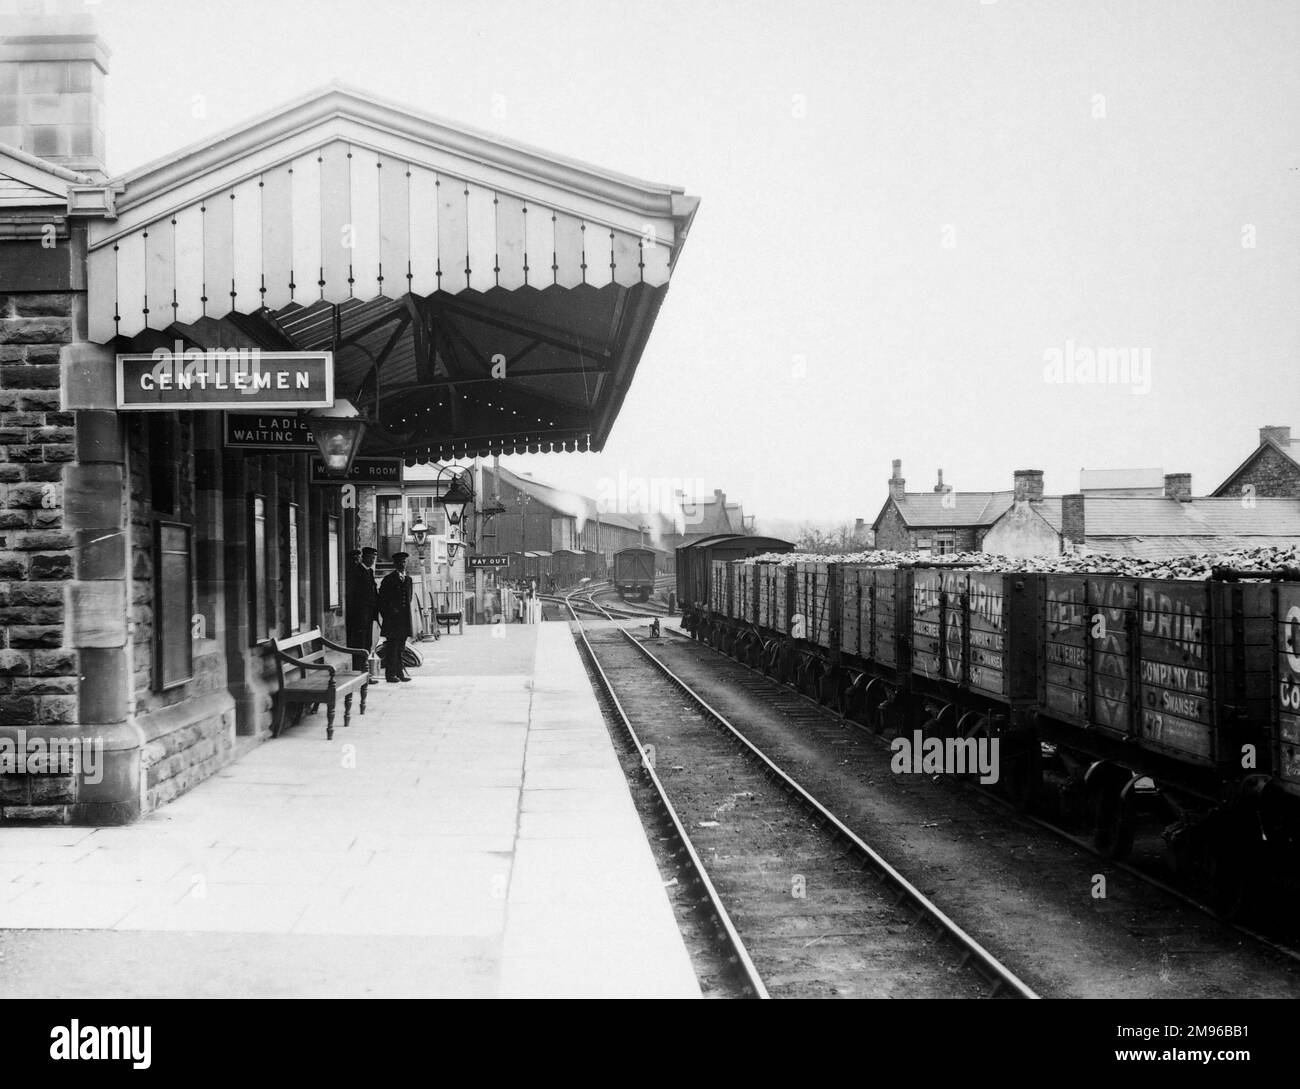 View along the platform of Glanamman (or Glanaman) Railway Station in Carmarthenshire, South Wales, on the Great Western Railway.  Two of the station staff can be seen partway along the platform, and trucks loaded with coal are on the line on the right. Stock Photo